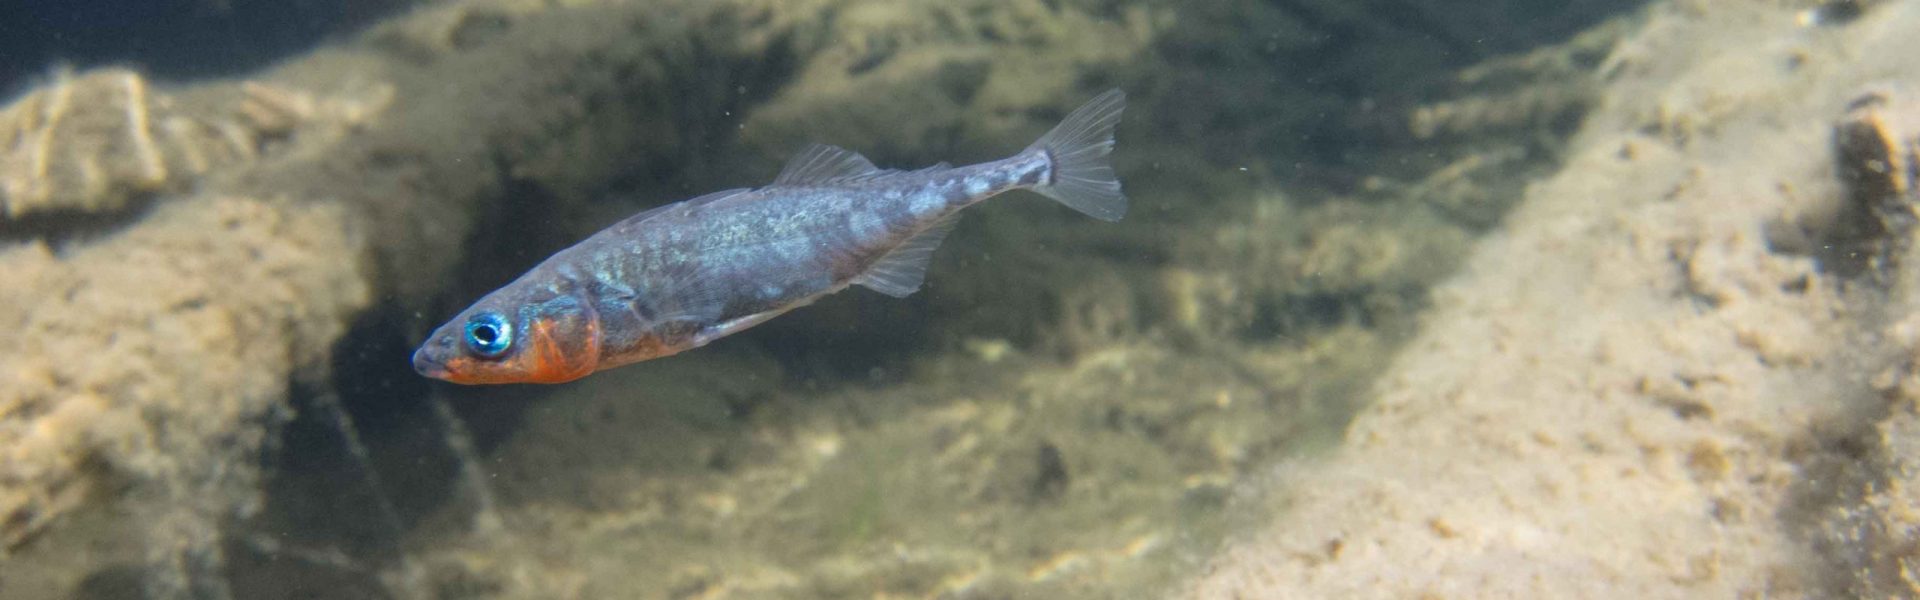 Male Stickleback from Gosling lake. This male has red under their chin and distinct blue eyes. 